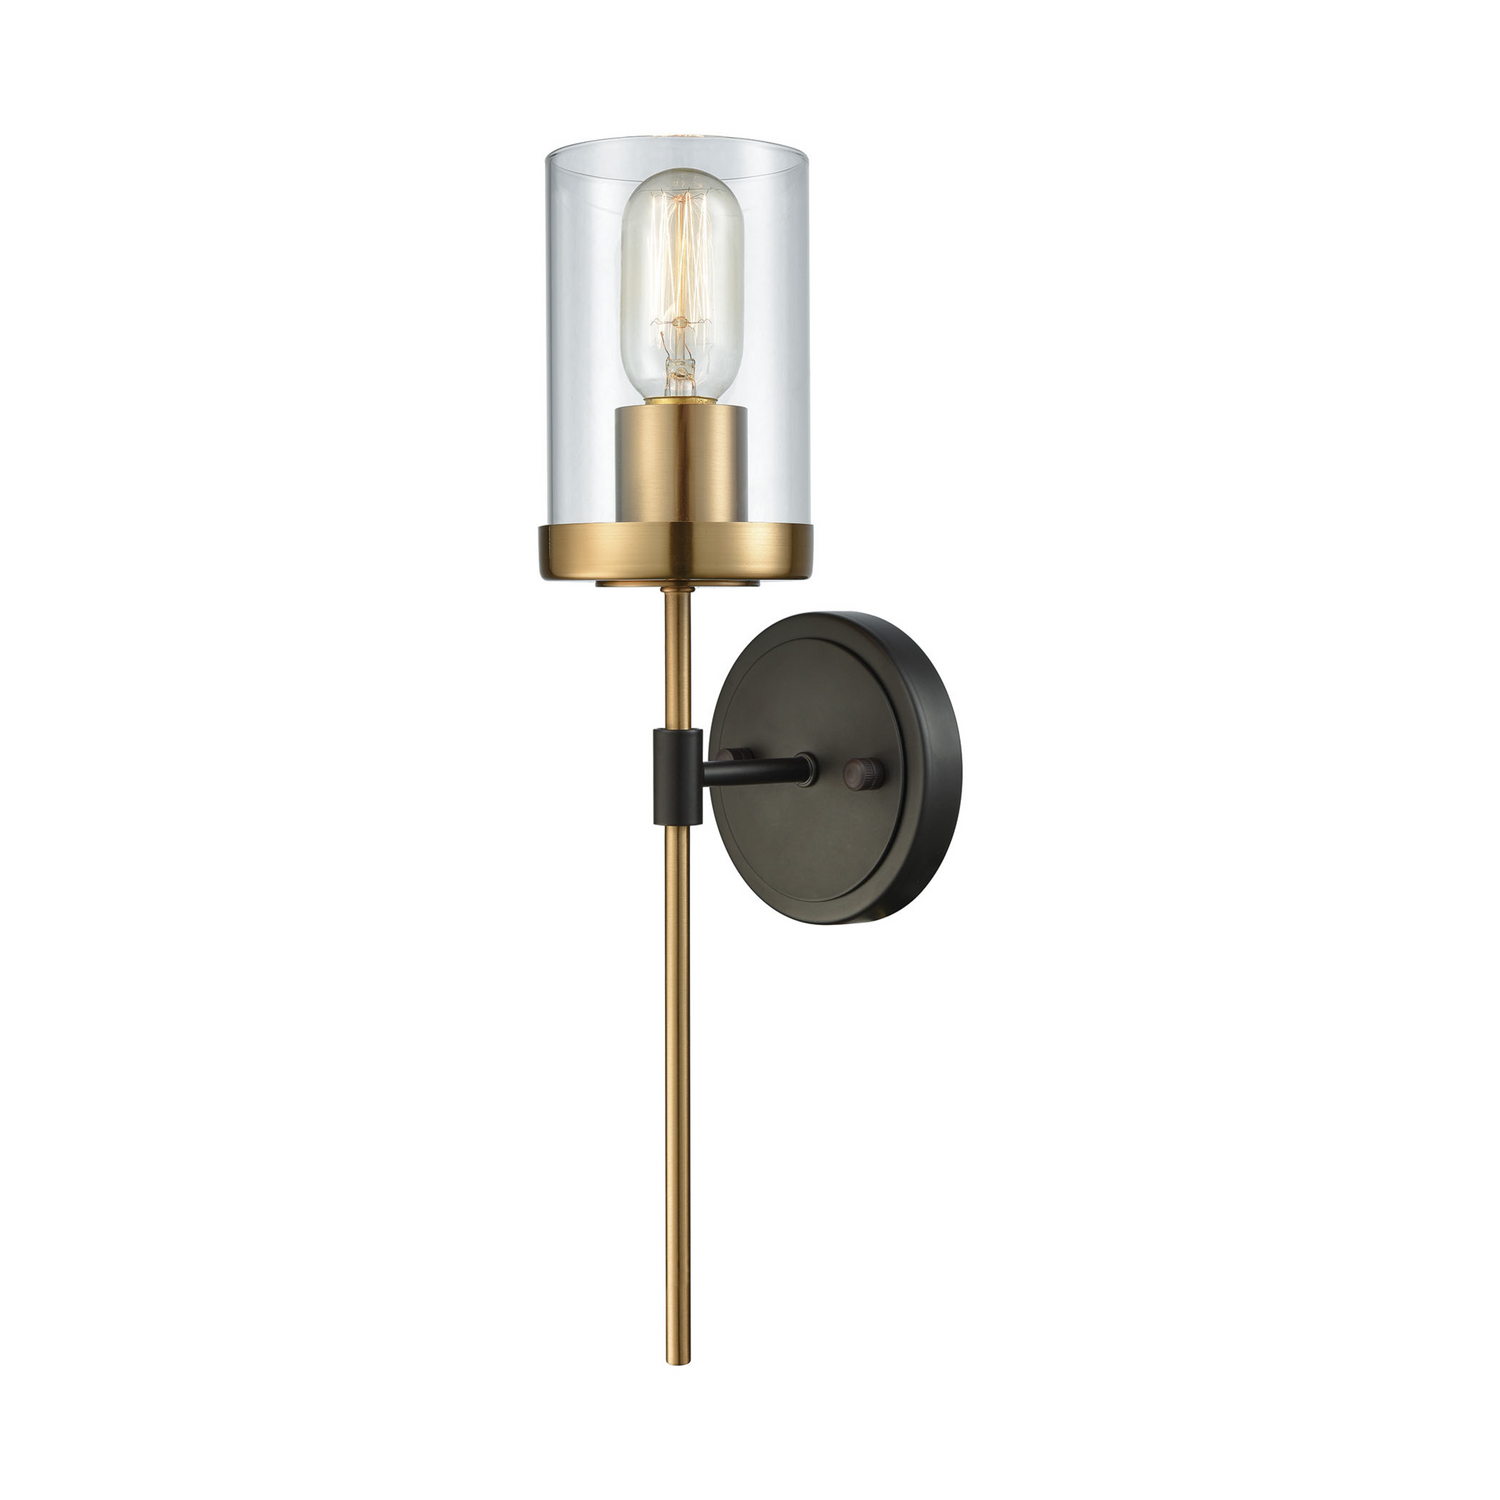 North Haven Satin Brass and Oil Rubbed Bronze Wall Sconce by Elk Lighitng 14550/1